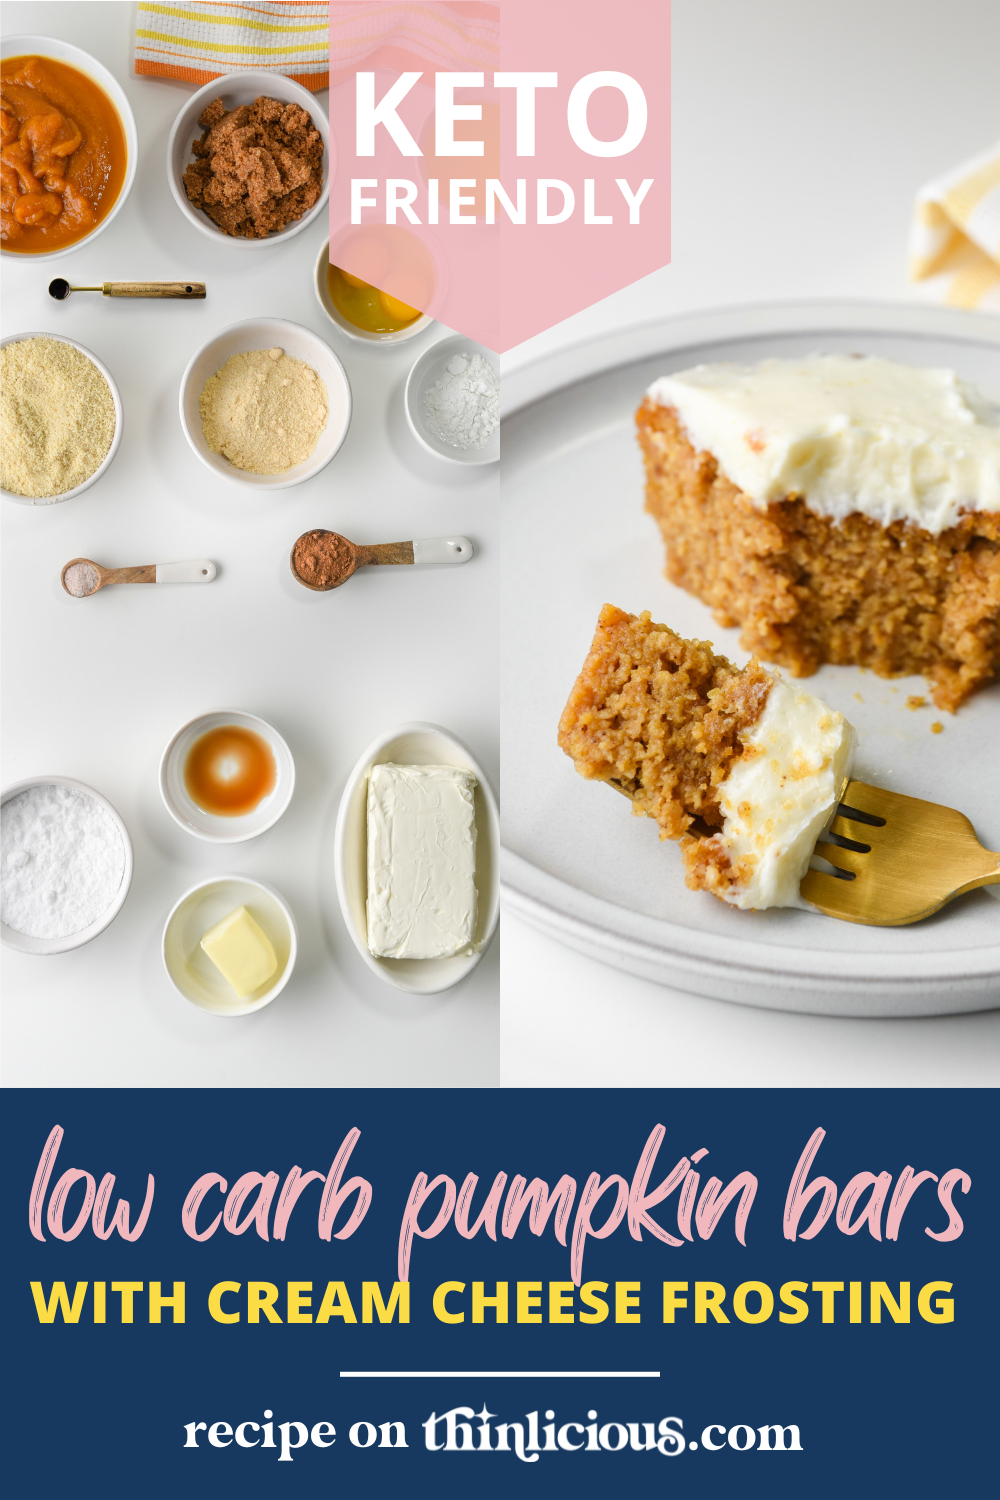 Fall is all about pumpkins! These pumpkin cheesecake bars are low-carb, gluten-free, and so rich and creamy you'll swear they are filled with sugar.